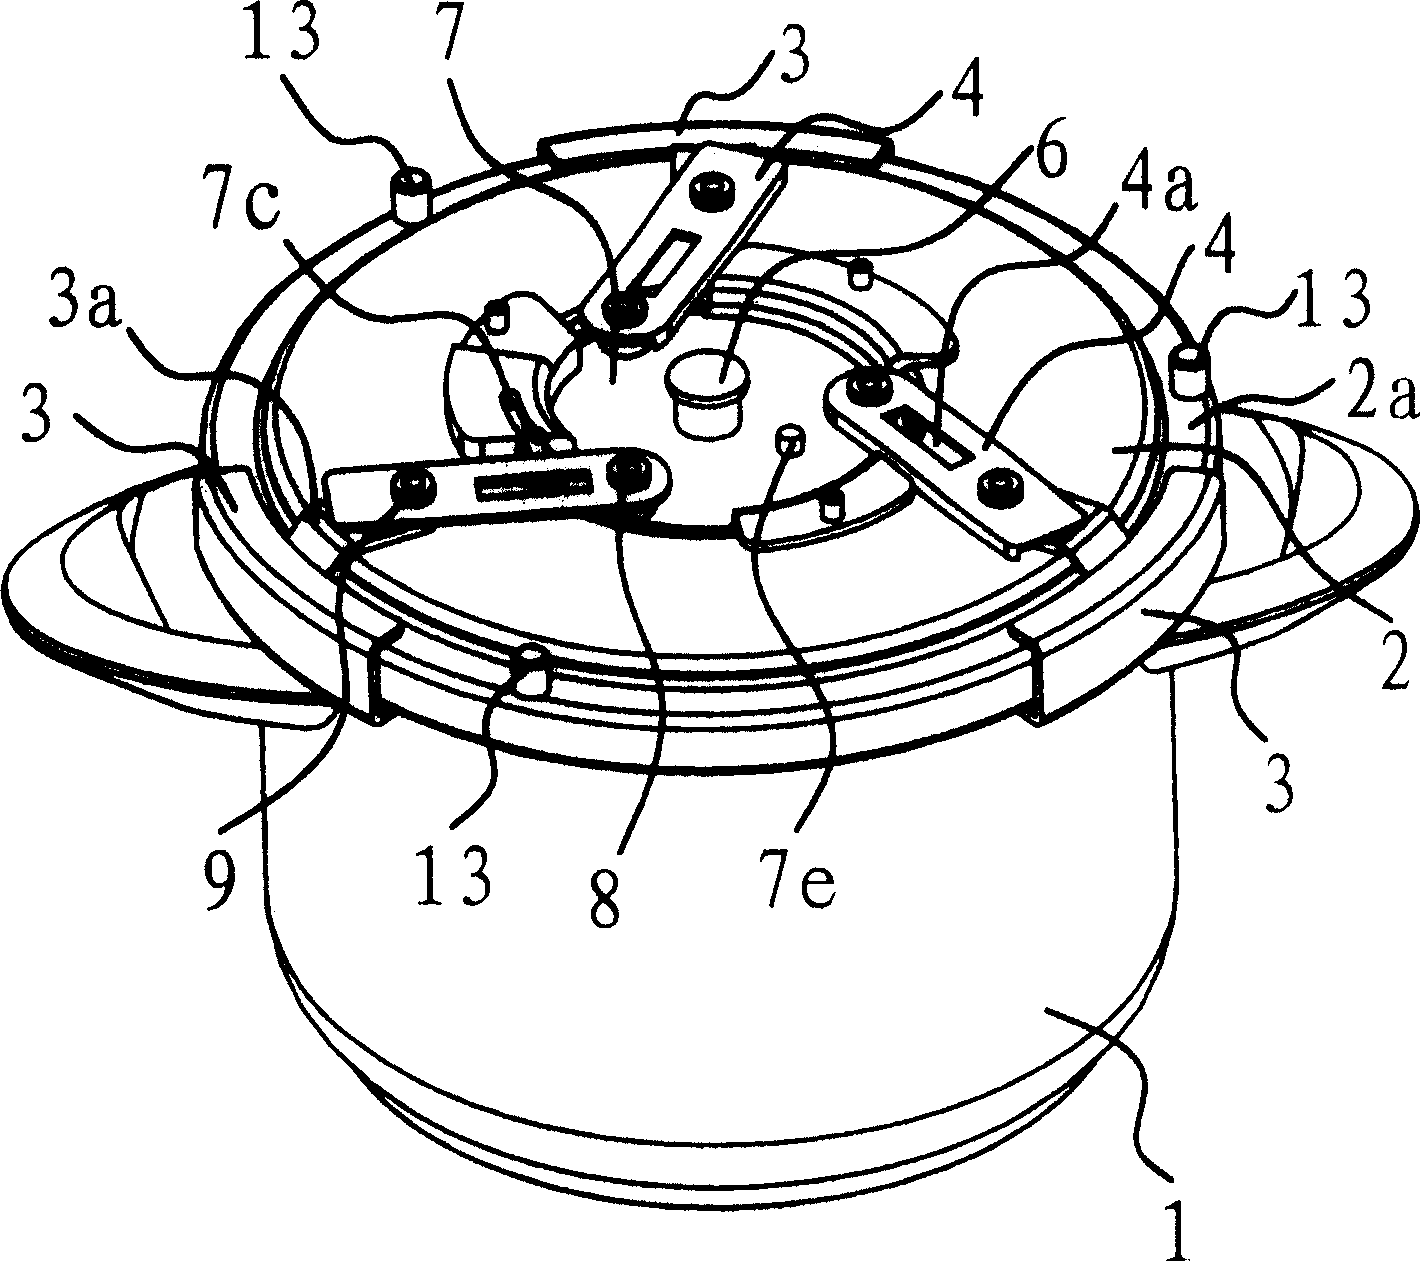 Open and close cover structure of a pressure cooker